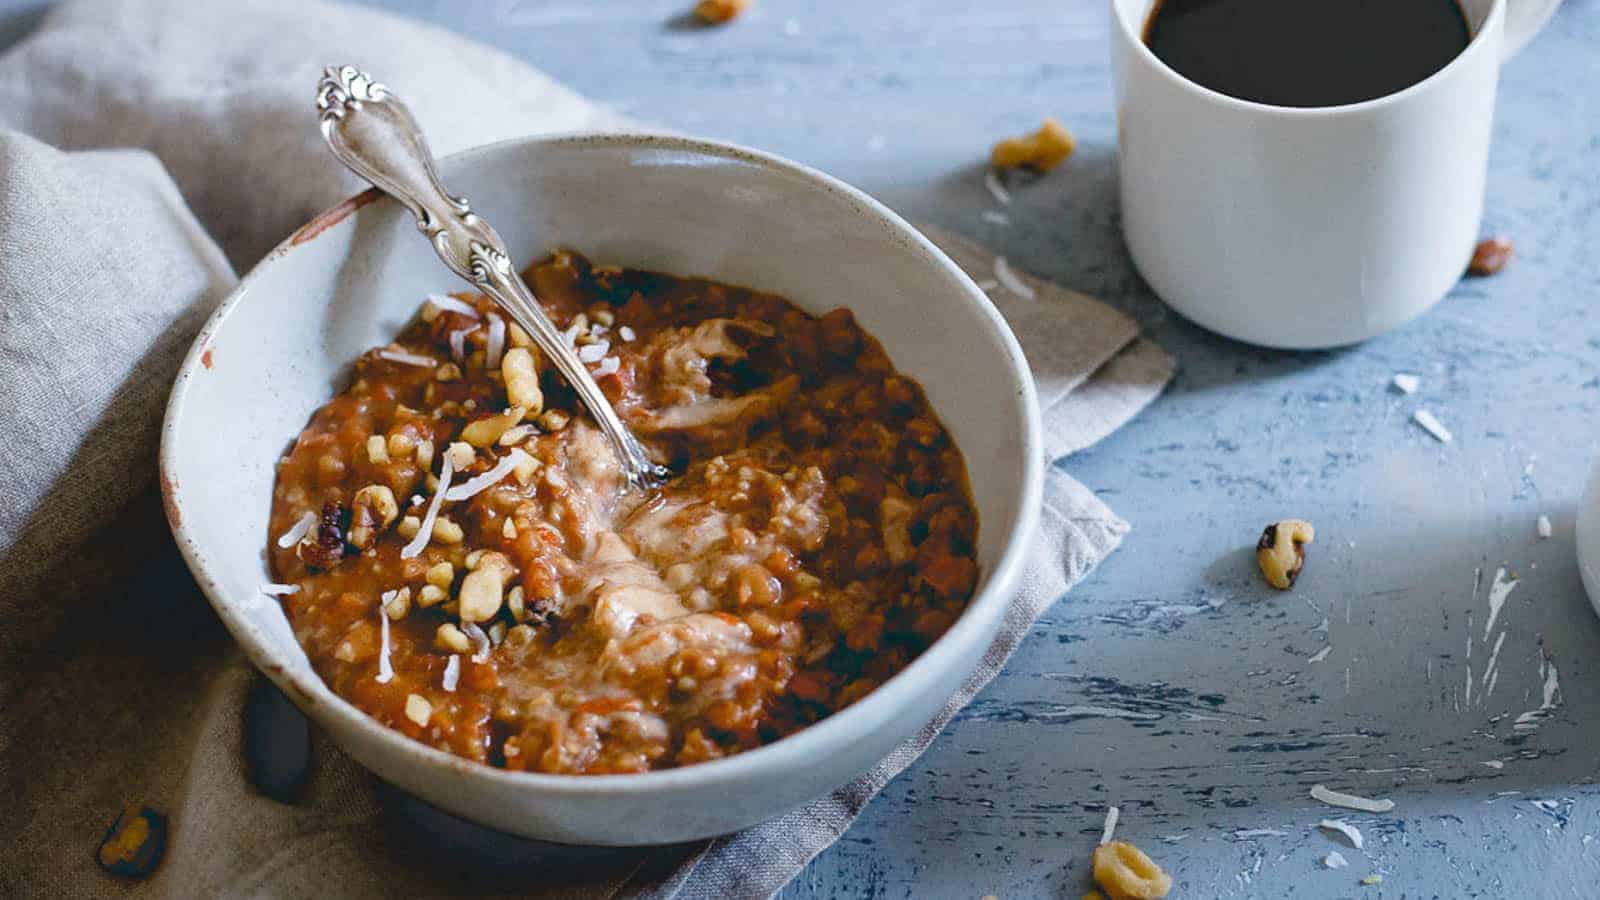 <p>This oatmeal brings the flavors of carrot cake to your breakfast table, enriched with apple butter, apples, and topped with apple butter mascarpone for a cozy fall-inspired dish.<br><strong>Get the Recipe: </strong><a href="https://www.runningtothekitchen.com/apple-butter-carrot-cake-oatmeal/?utm_source=msn&utm_medium=page&utm_campaign=msn">Apple Carrot Cake Oatmeal</a></p>